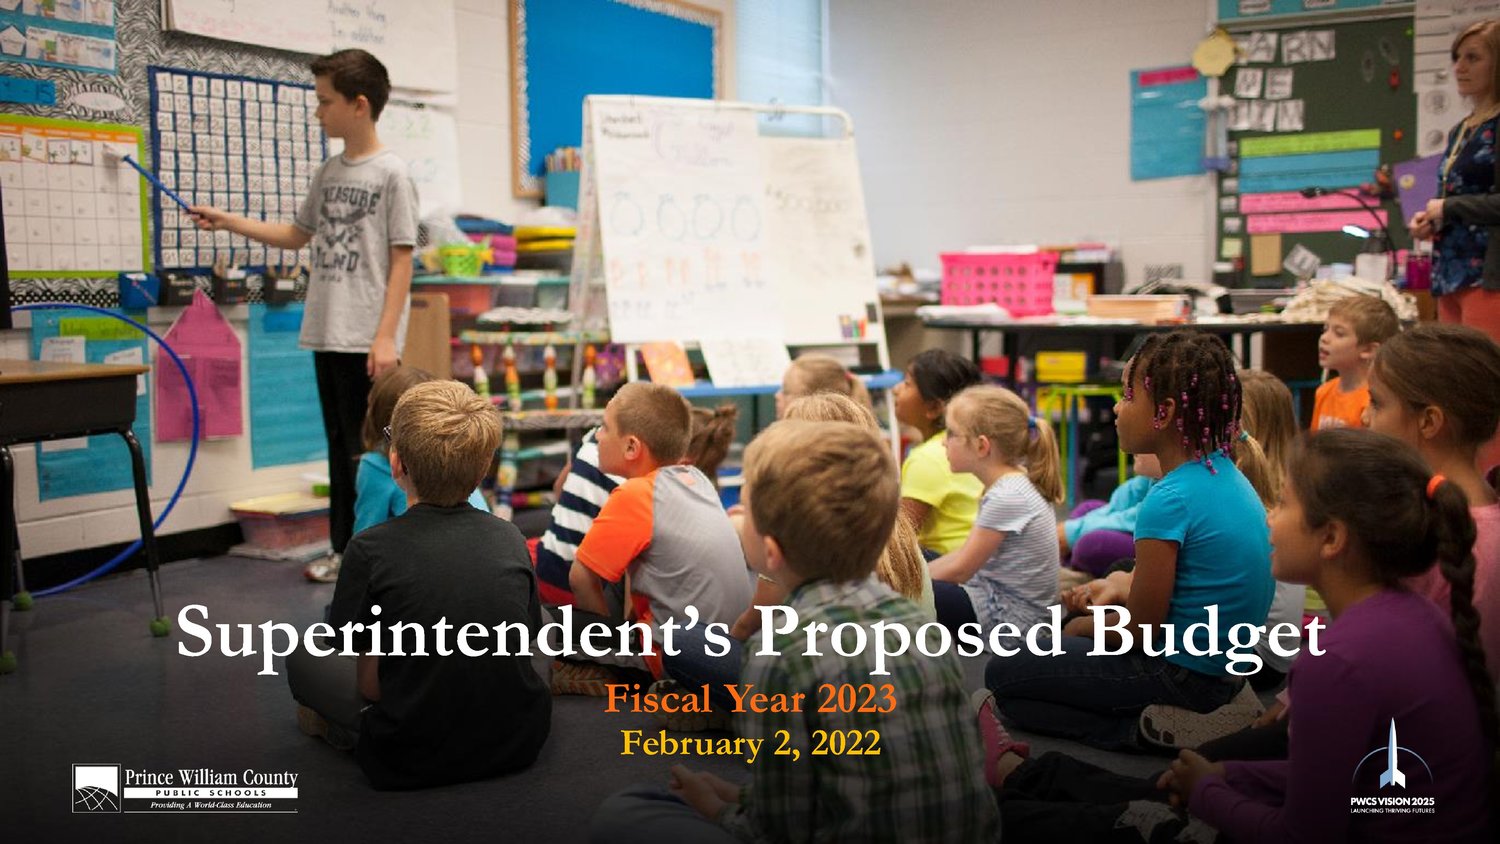 Read the Superintendent's Proposed Fiscal Year 2023 Budget